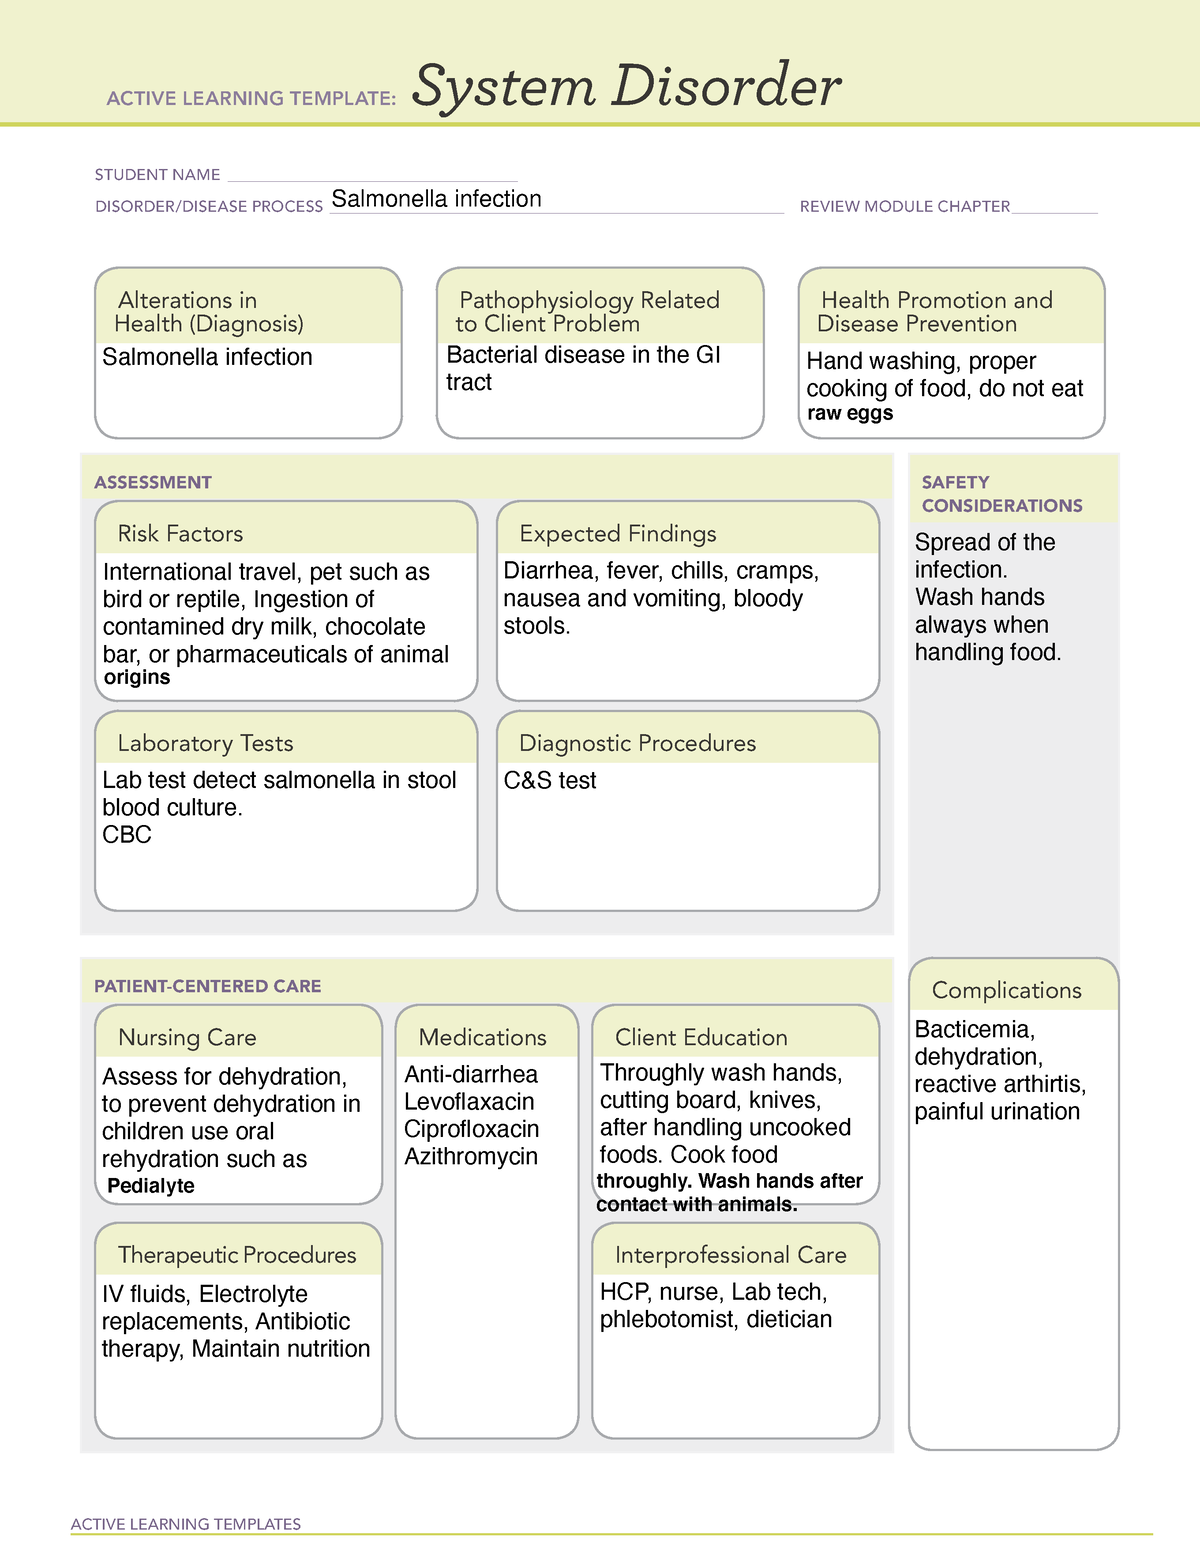 Salmonella infection - ati clinical work - ACTIVE LEARNING TEMPLATES ...